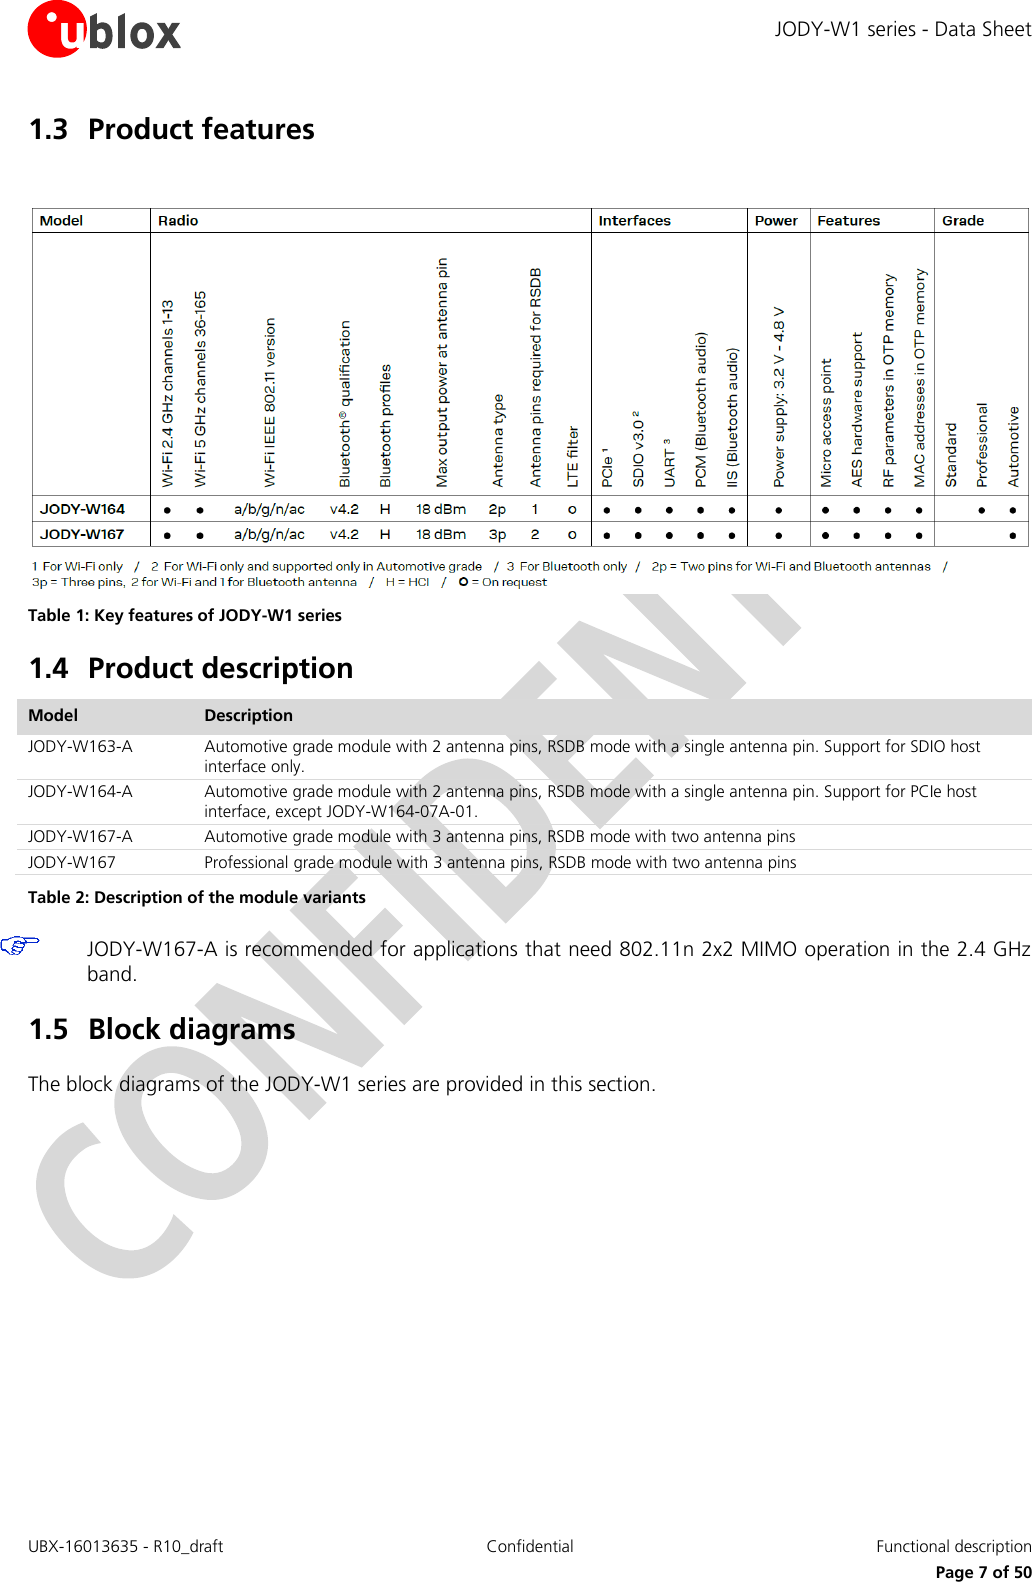 JODY-W1 series - Data Sheet UBX-16013635 - R10_draft Confidential  Functional description     Page 7 of 50 1.3 Product features   Table 1: Key features of JODY-W1 series 1.4 Product description Model Description JODY-W163-A Automotive grade module with 2 antenna pins, RSDB mode with a single antenna pin. Support for SDIO host interface only. JODY-W164-A Automotive grade module with 2 antenna pins, RSDB mode with a single antenna pin. Support for PCIe host interface, except JODY-W164-07A-01. JODY-W167-A Automotive grade module with 3 antenna pins, RSDB mode with two antenna pins JODY-W167 Professional grade module with 3 antenna pins, RSDB mode with two antenna pins Table 2: Description of the module variants  JODY-W167-A is recommended for applications that need 802.11n 2x2 MIMO operation in the 2.4 GHz band. 1.5 Block diagrams The block diagrams of the JODY-W1 series are provided in this section. 